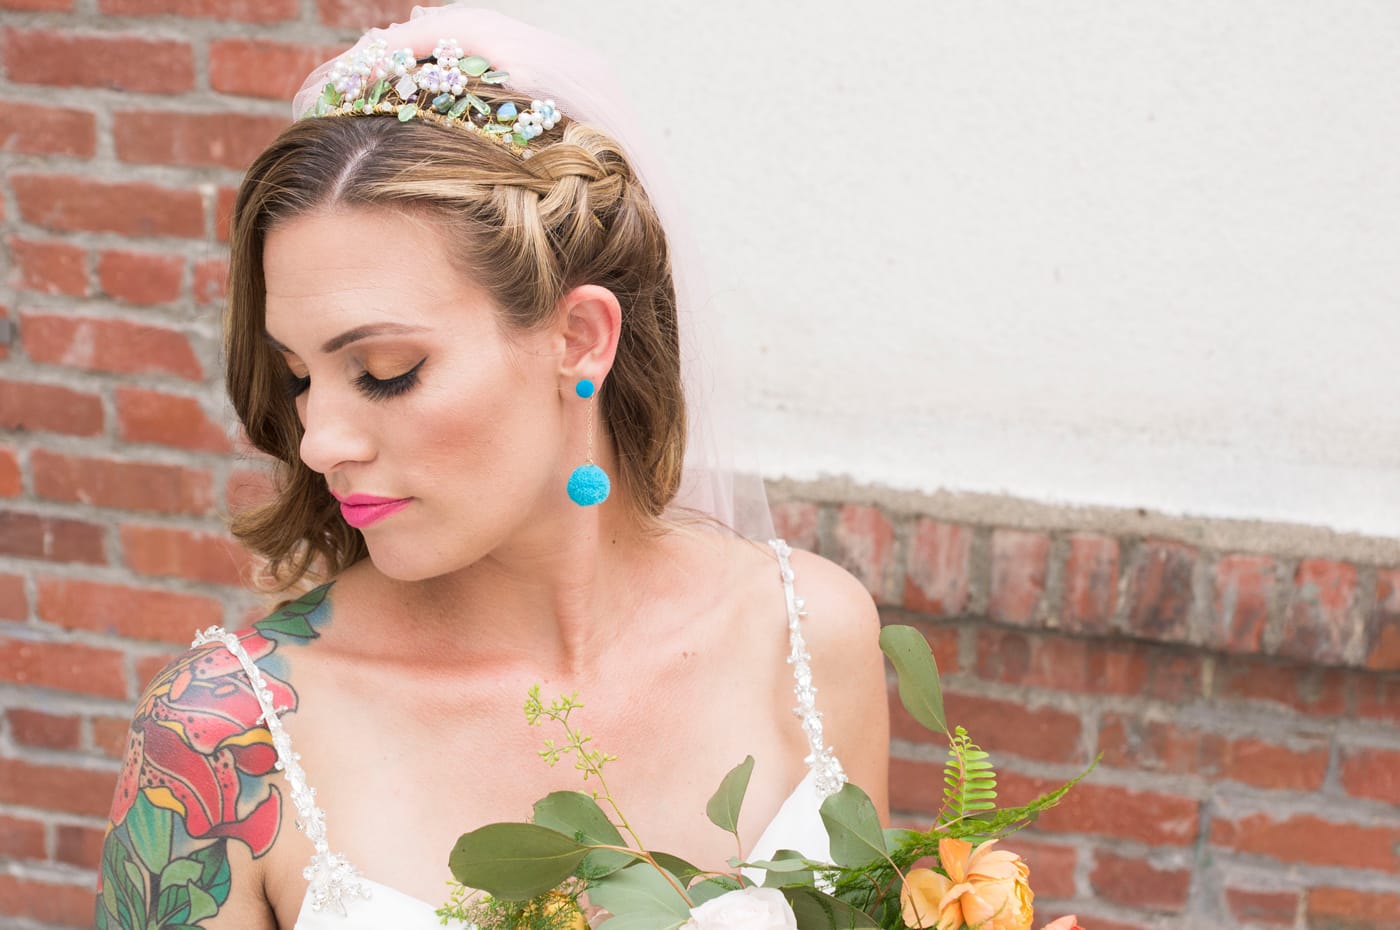 Punchy Citrus and Confetti-Themed Styled Shoot Featuring Blaire by Sottero & Midgley.